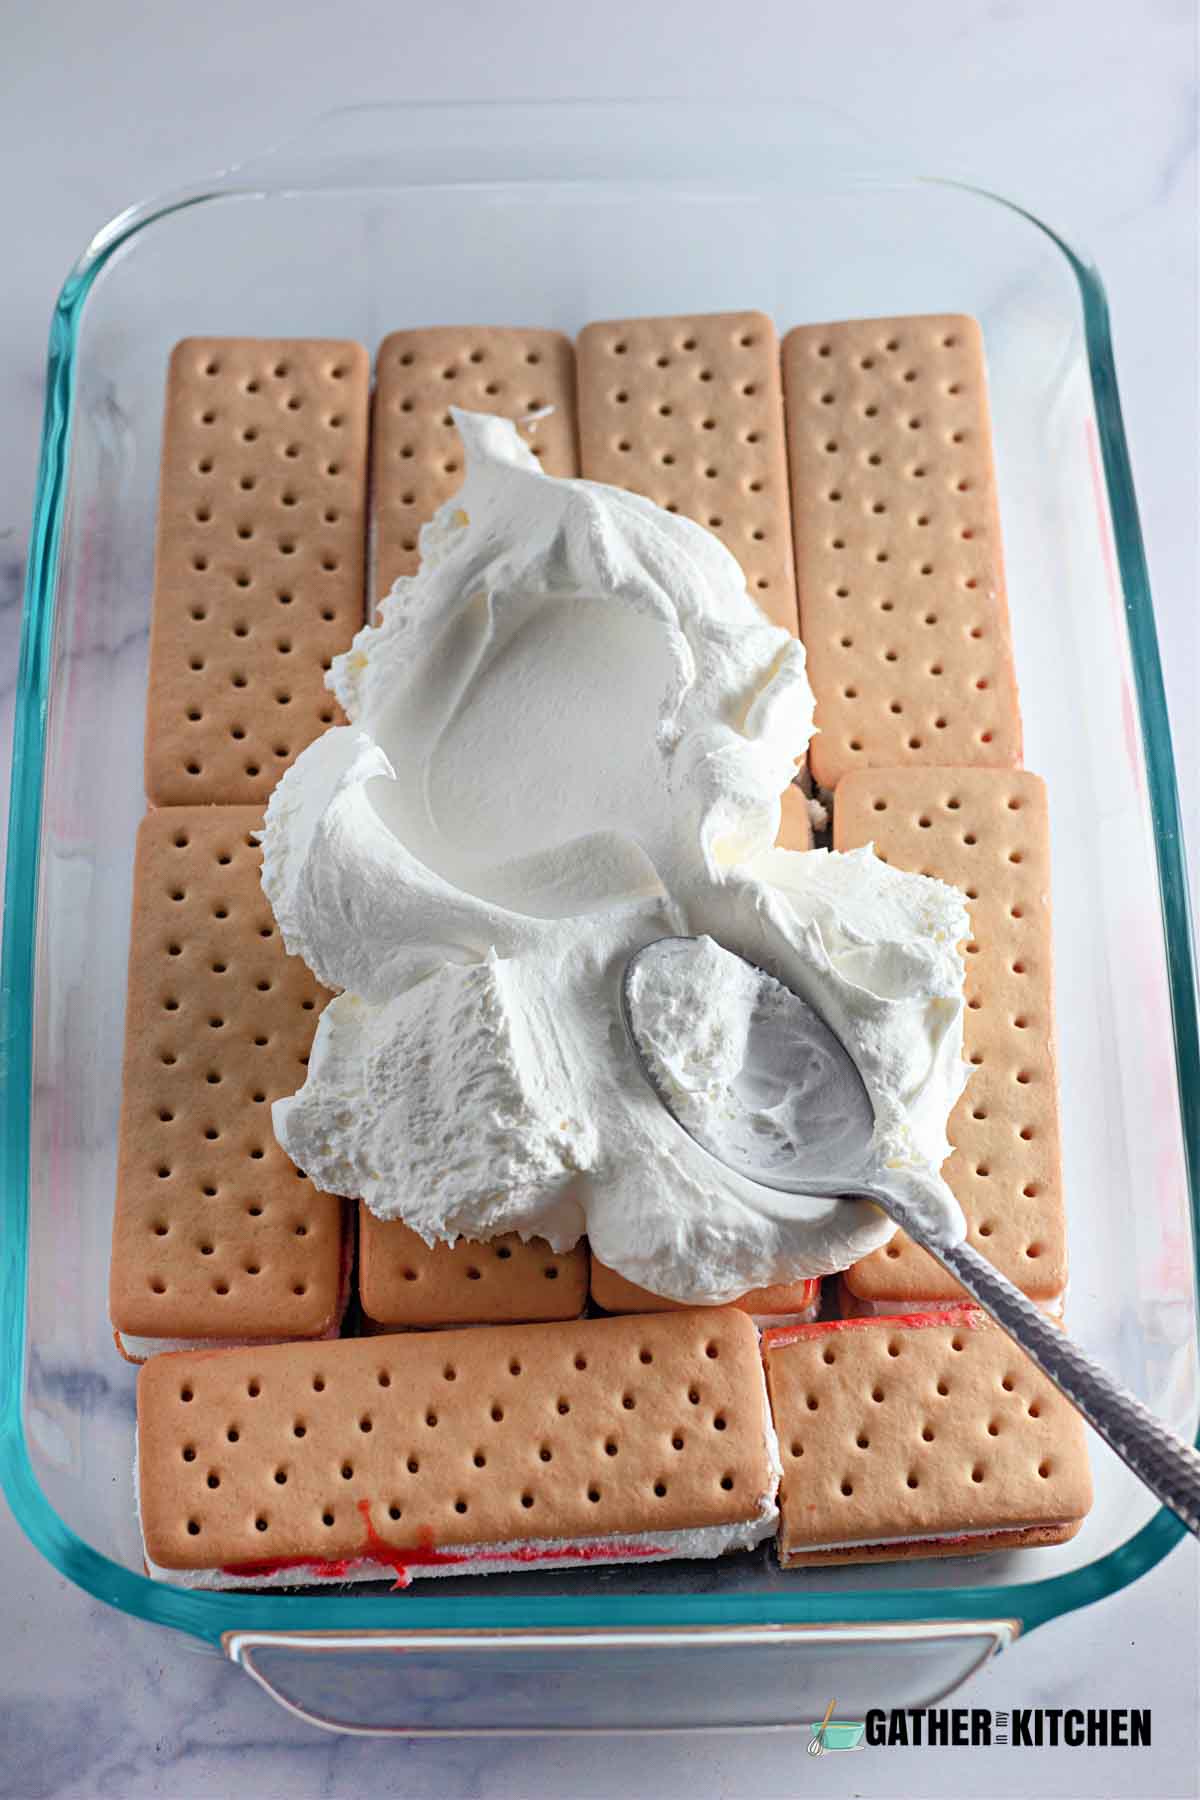 A tray with a layer of ice cream sandwiches with cool whip on top.